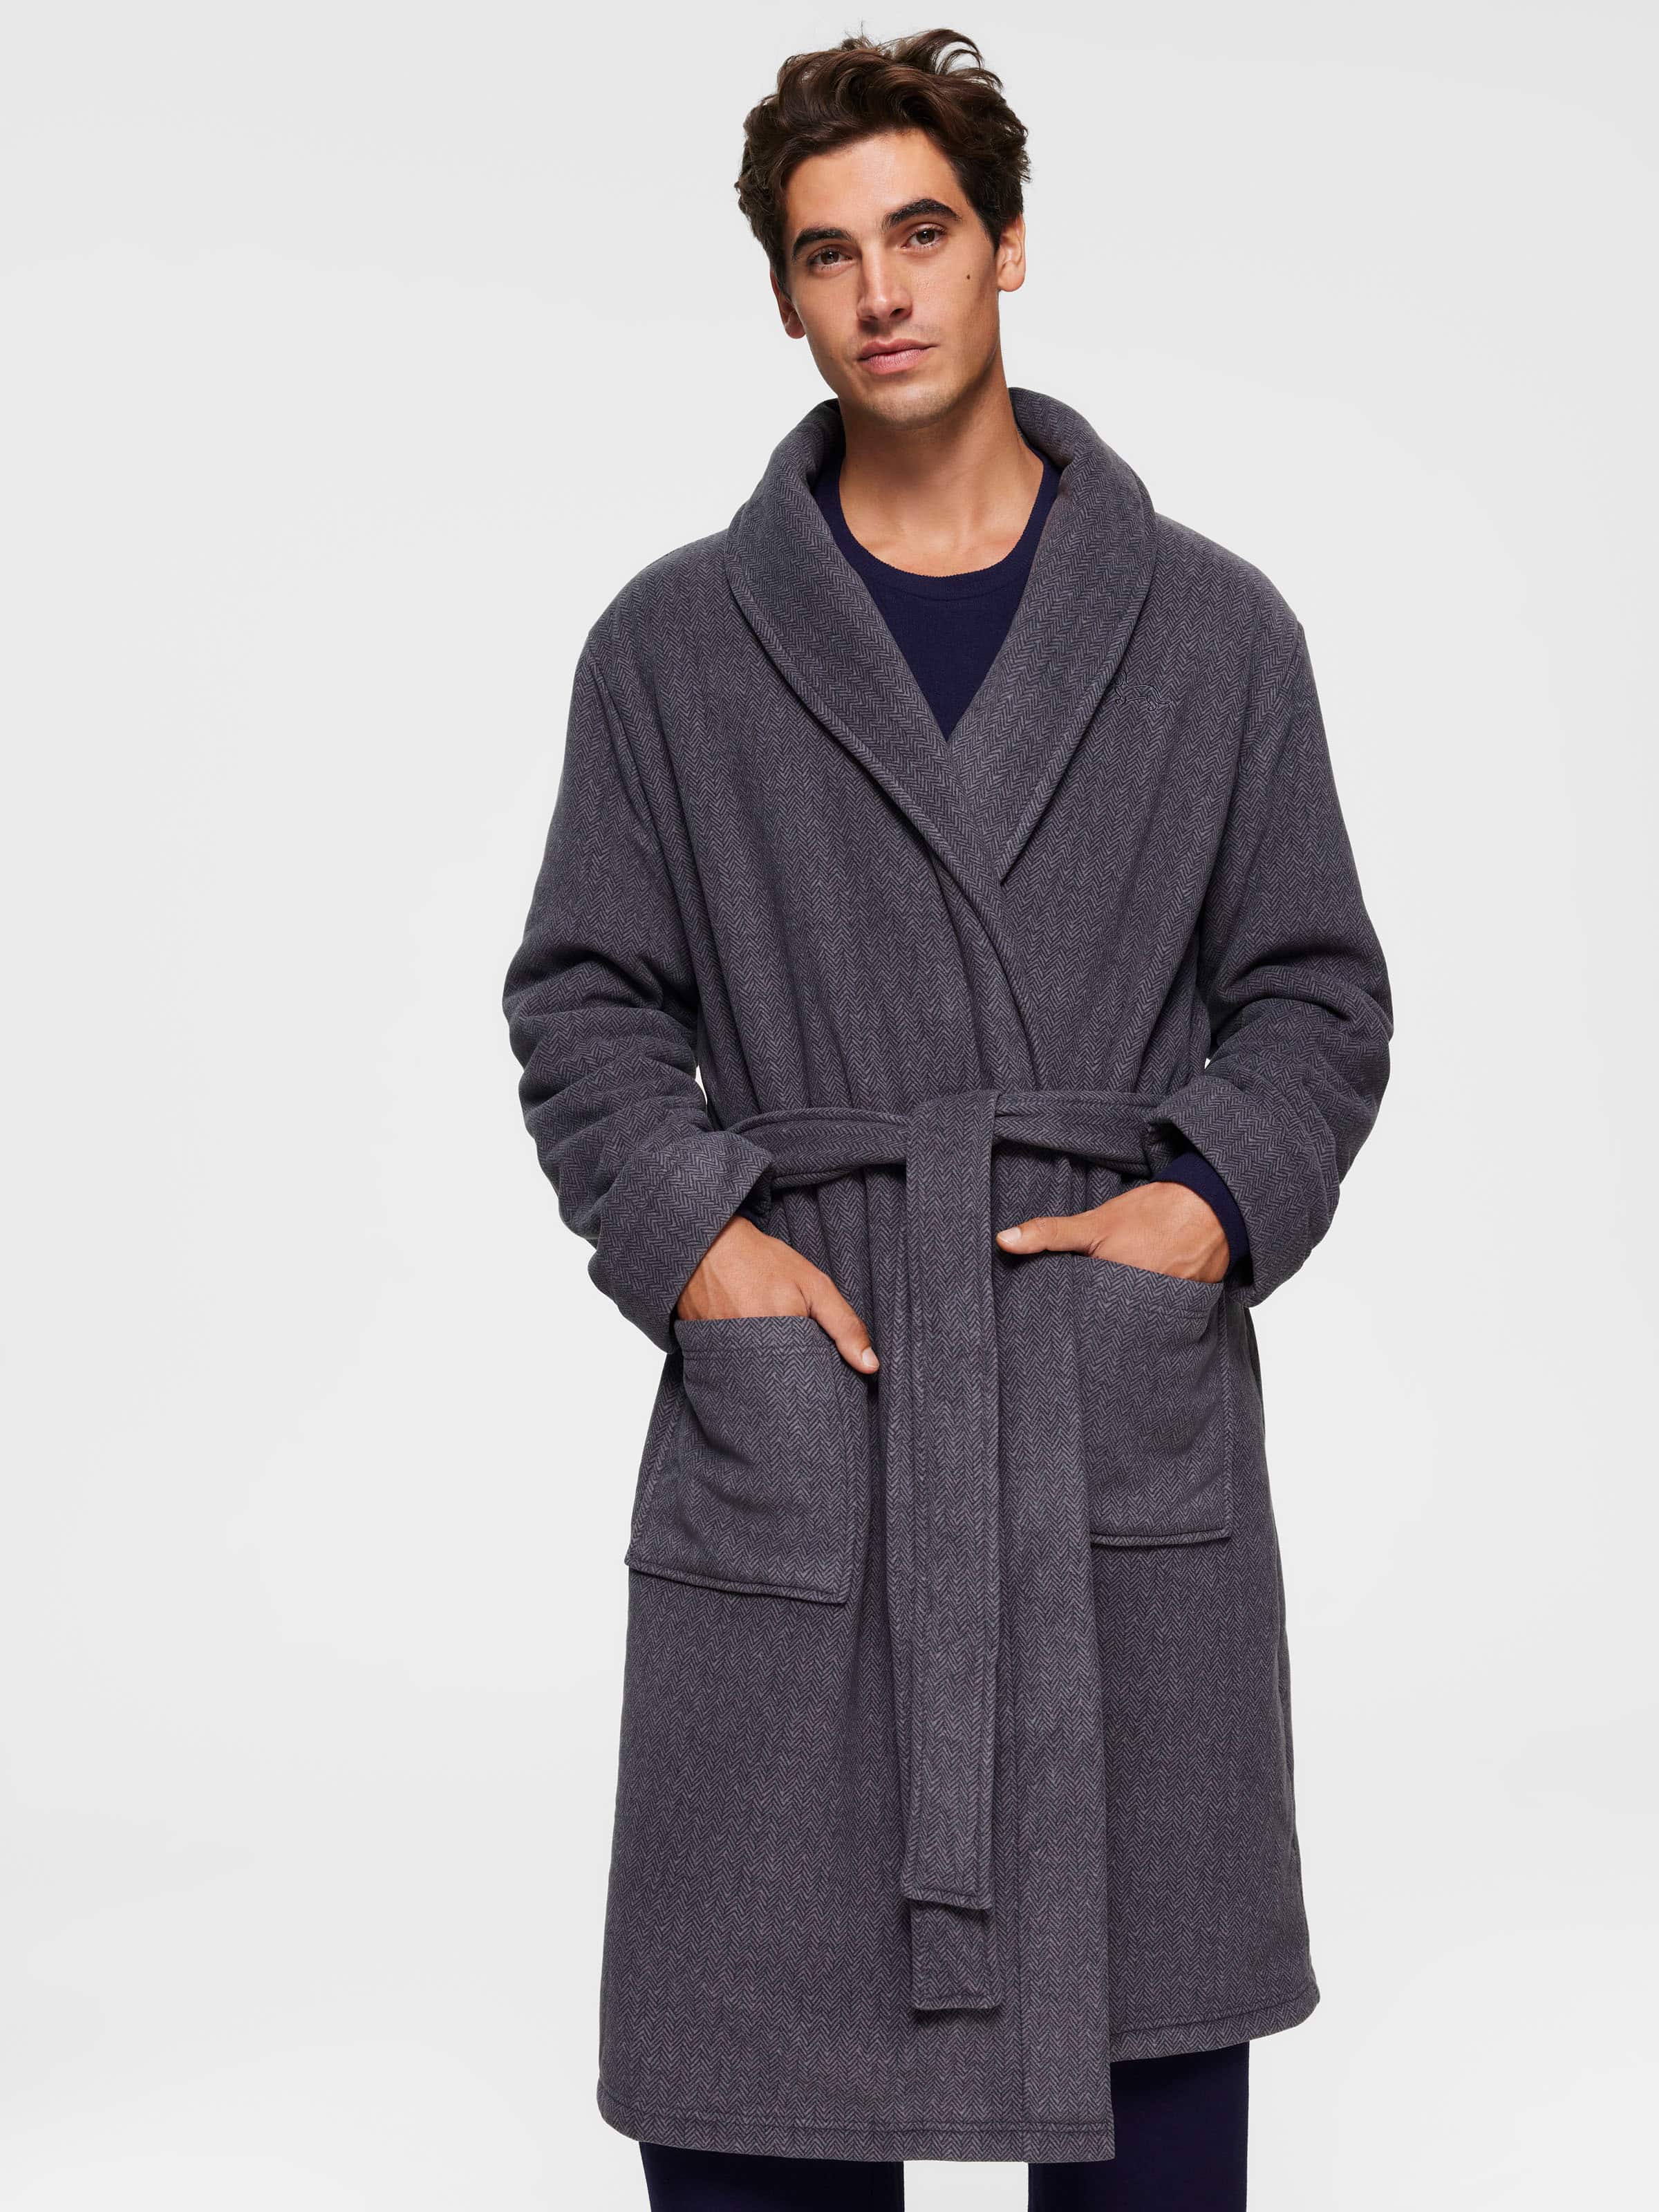 Luxury Hooded White Terry Towelling Dressing Gown - Egyptian Collection  Soft Cotton - The Towel Shop